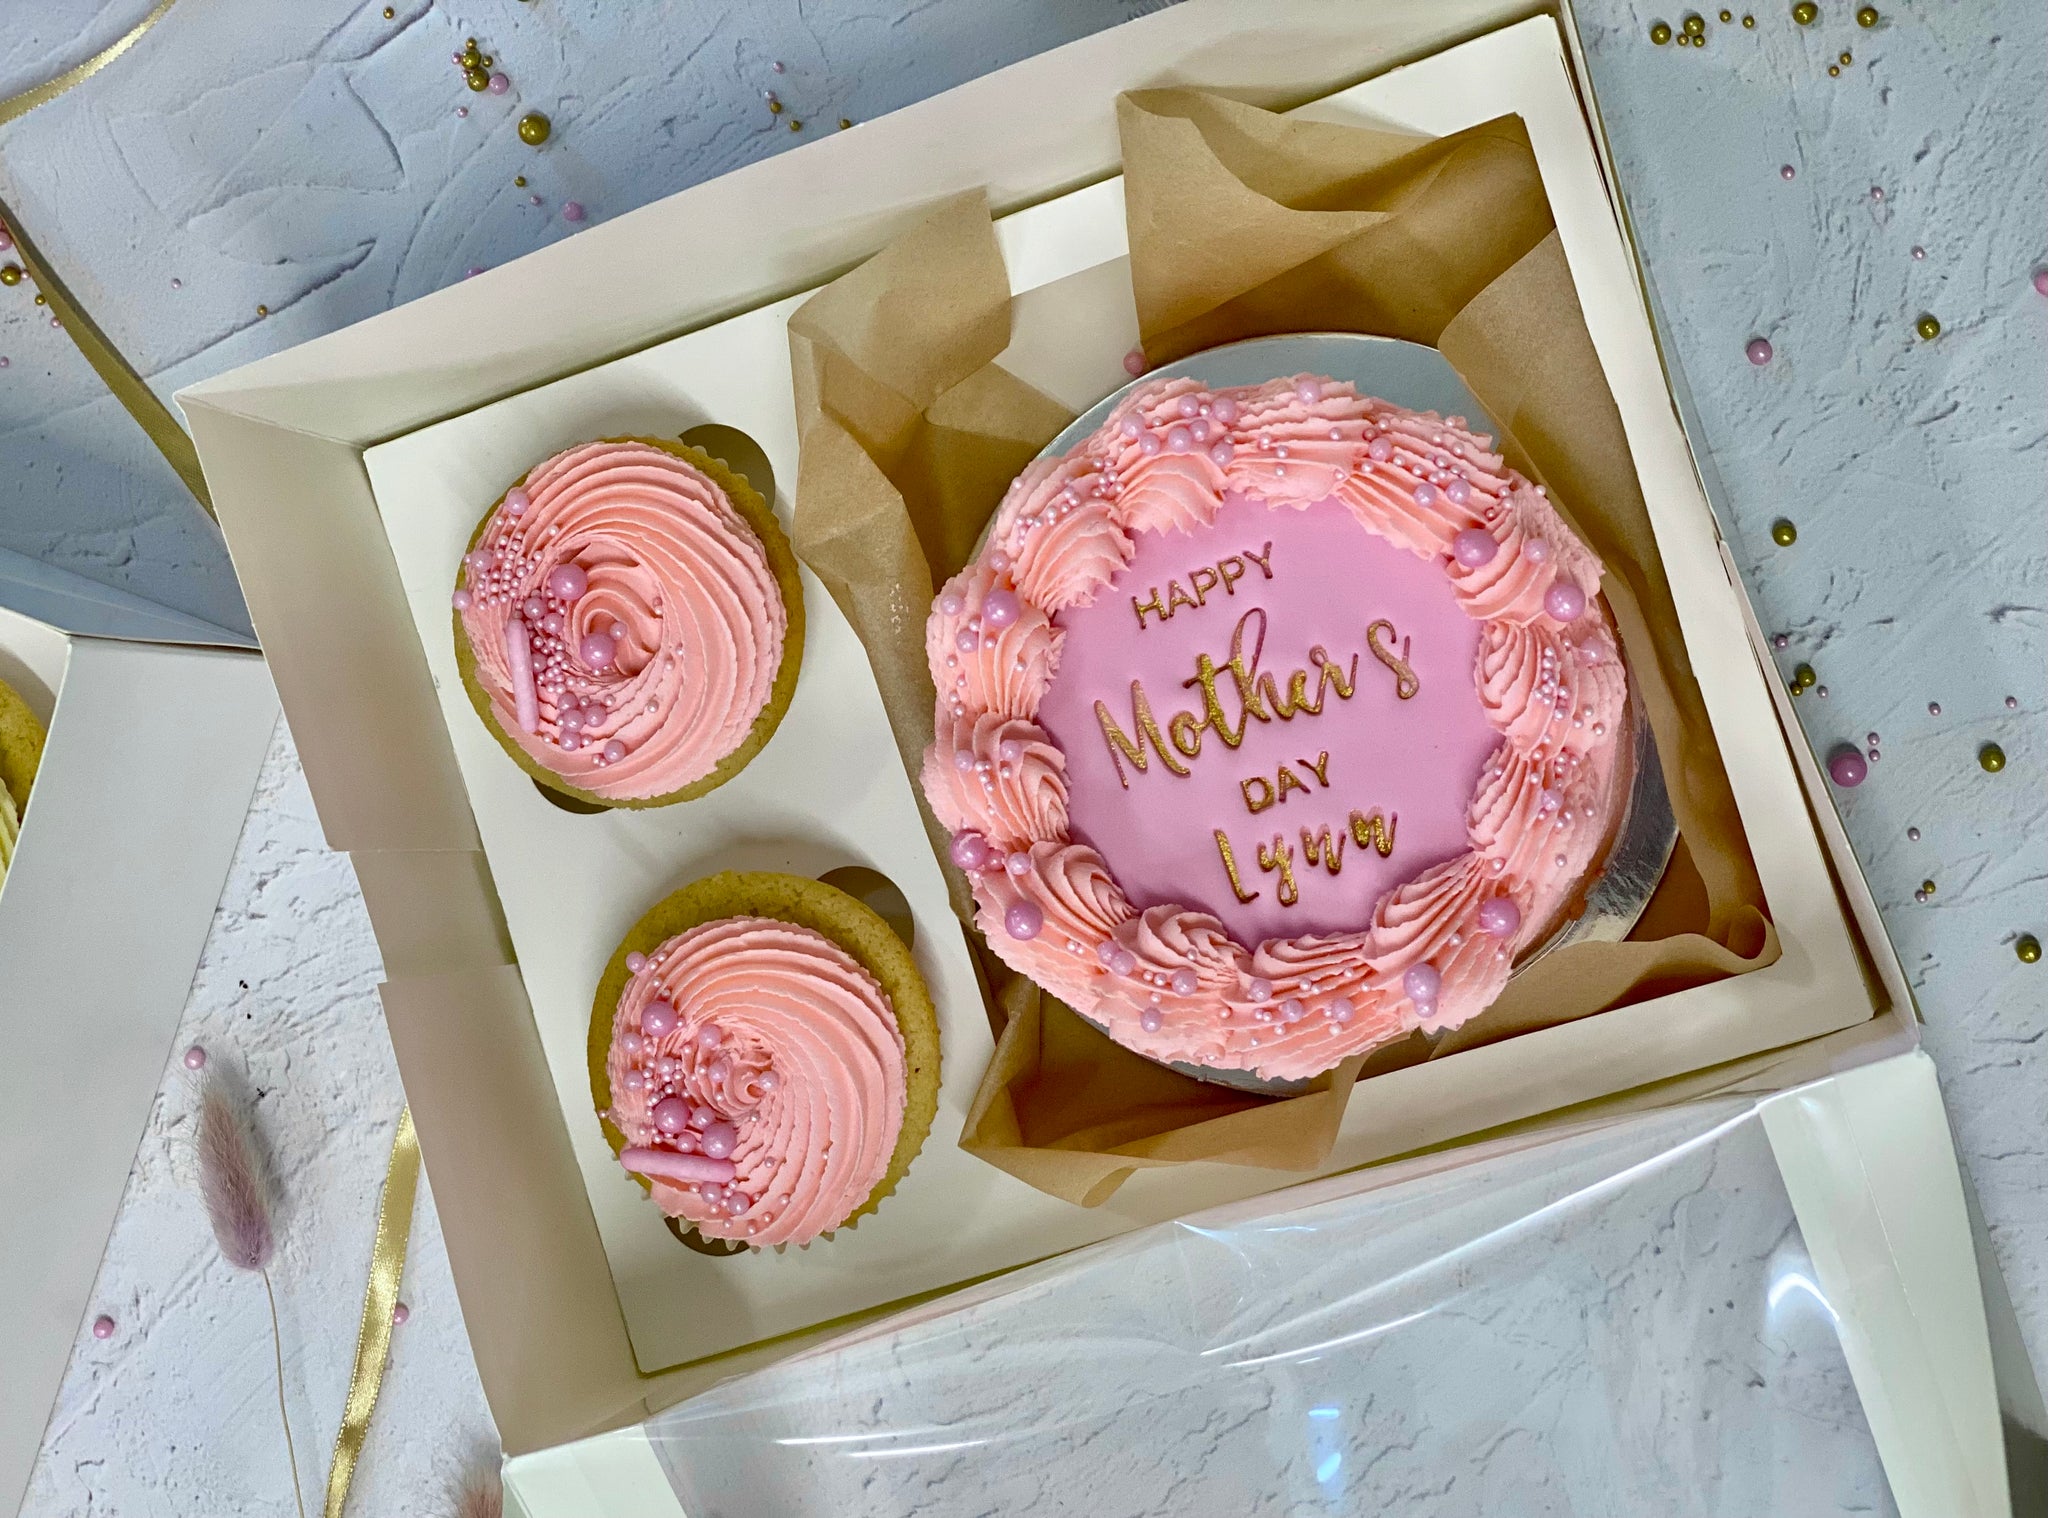 Buy Cakes Online at Mimi's Bakehouse